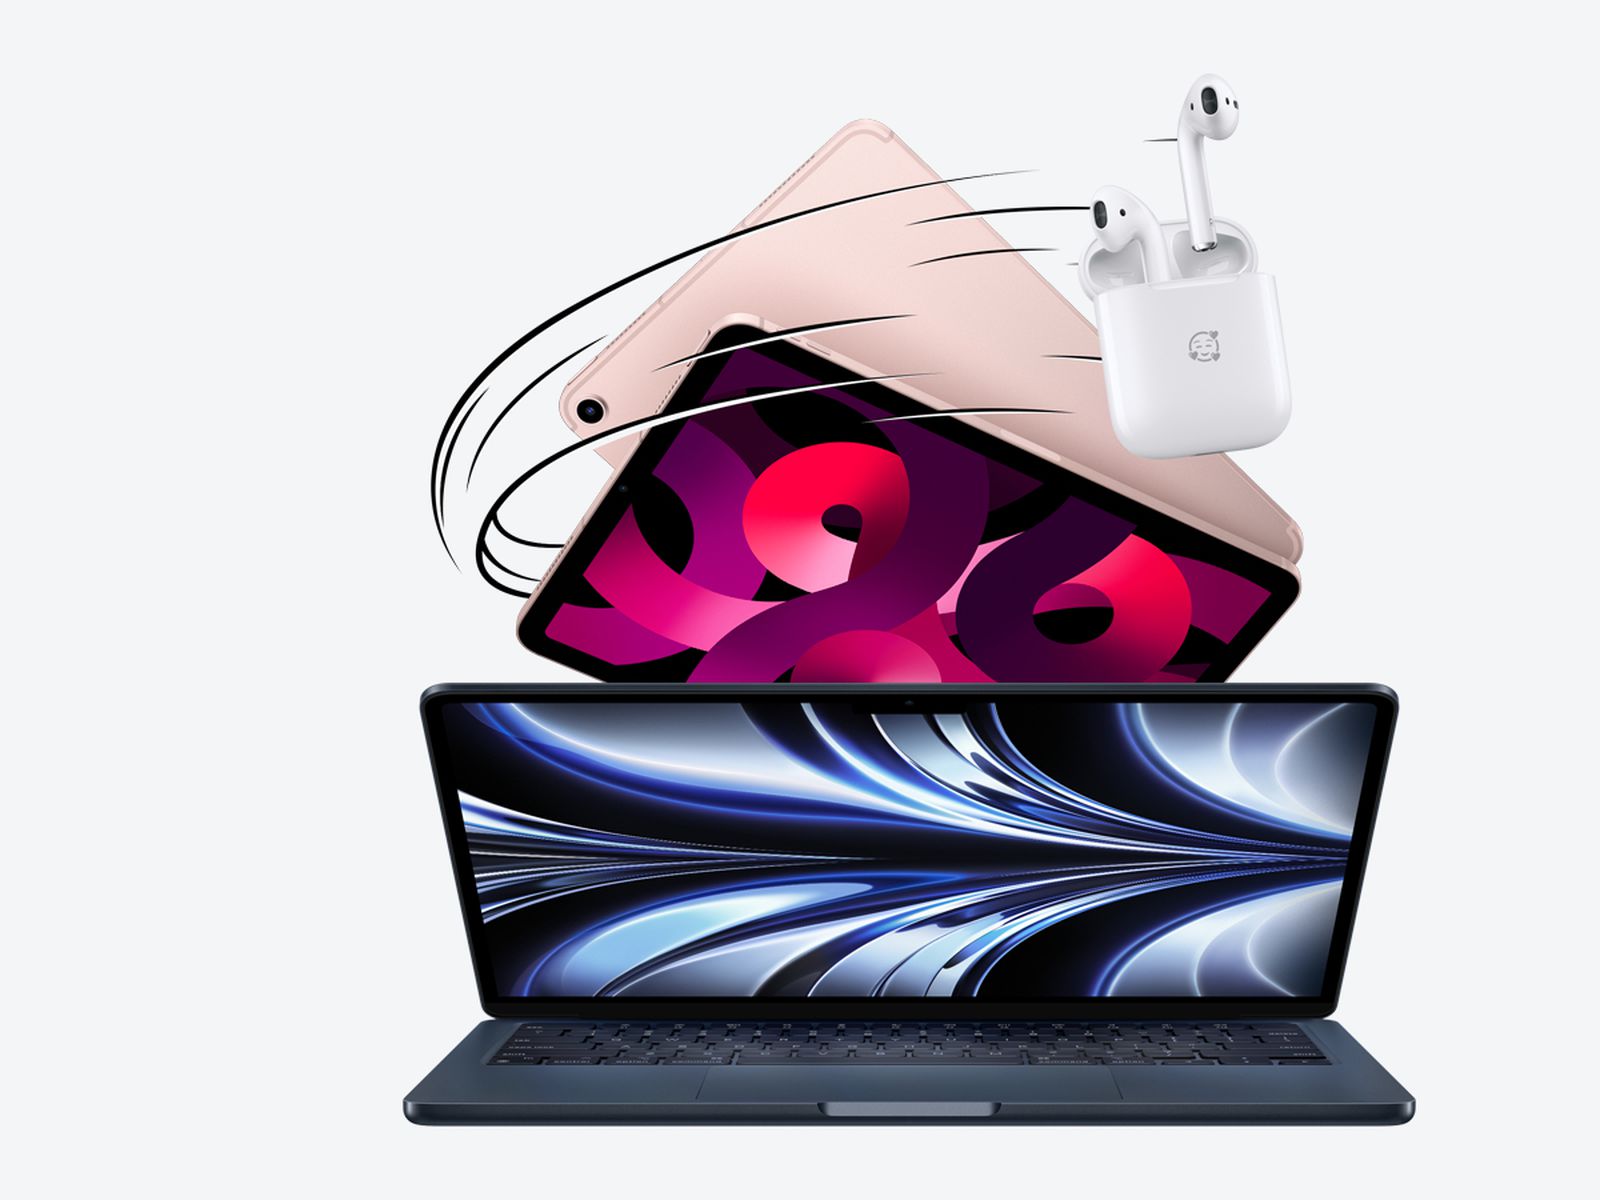 Free Airpods When You Buy IPads/Macs? Apple's 2023 Back To School Education  Promotion is Here! - WORLD OF BUZZ